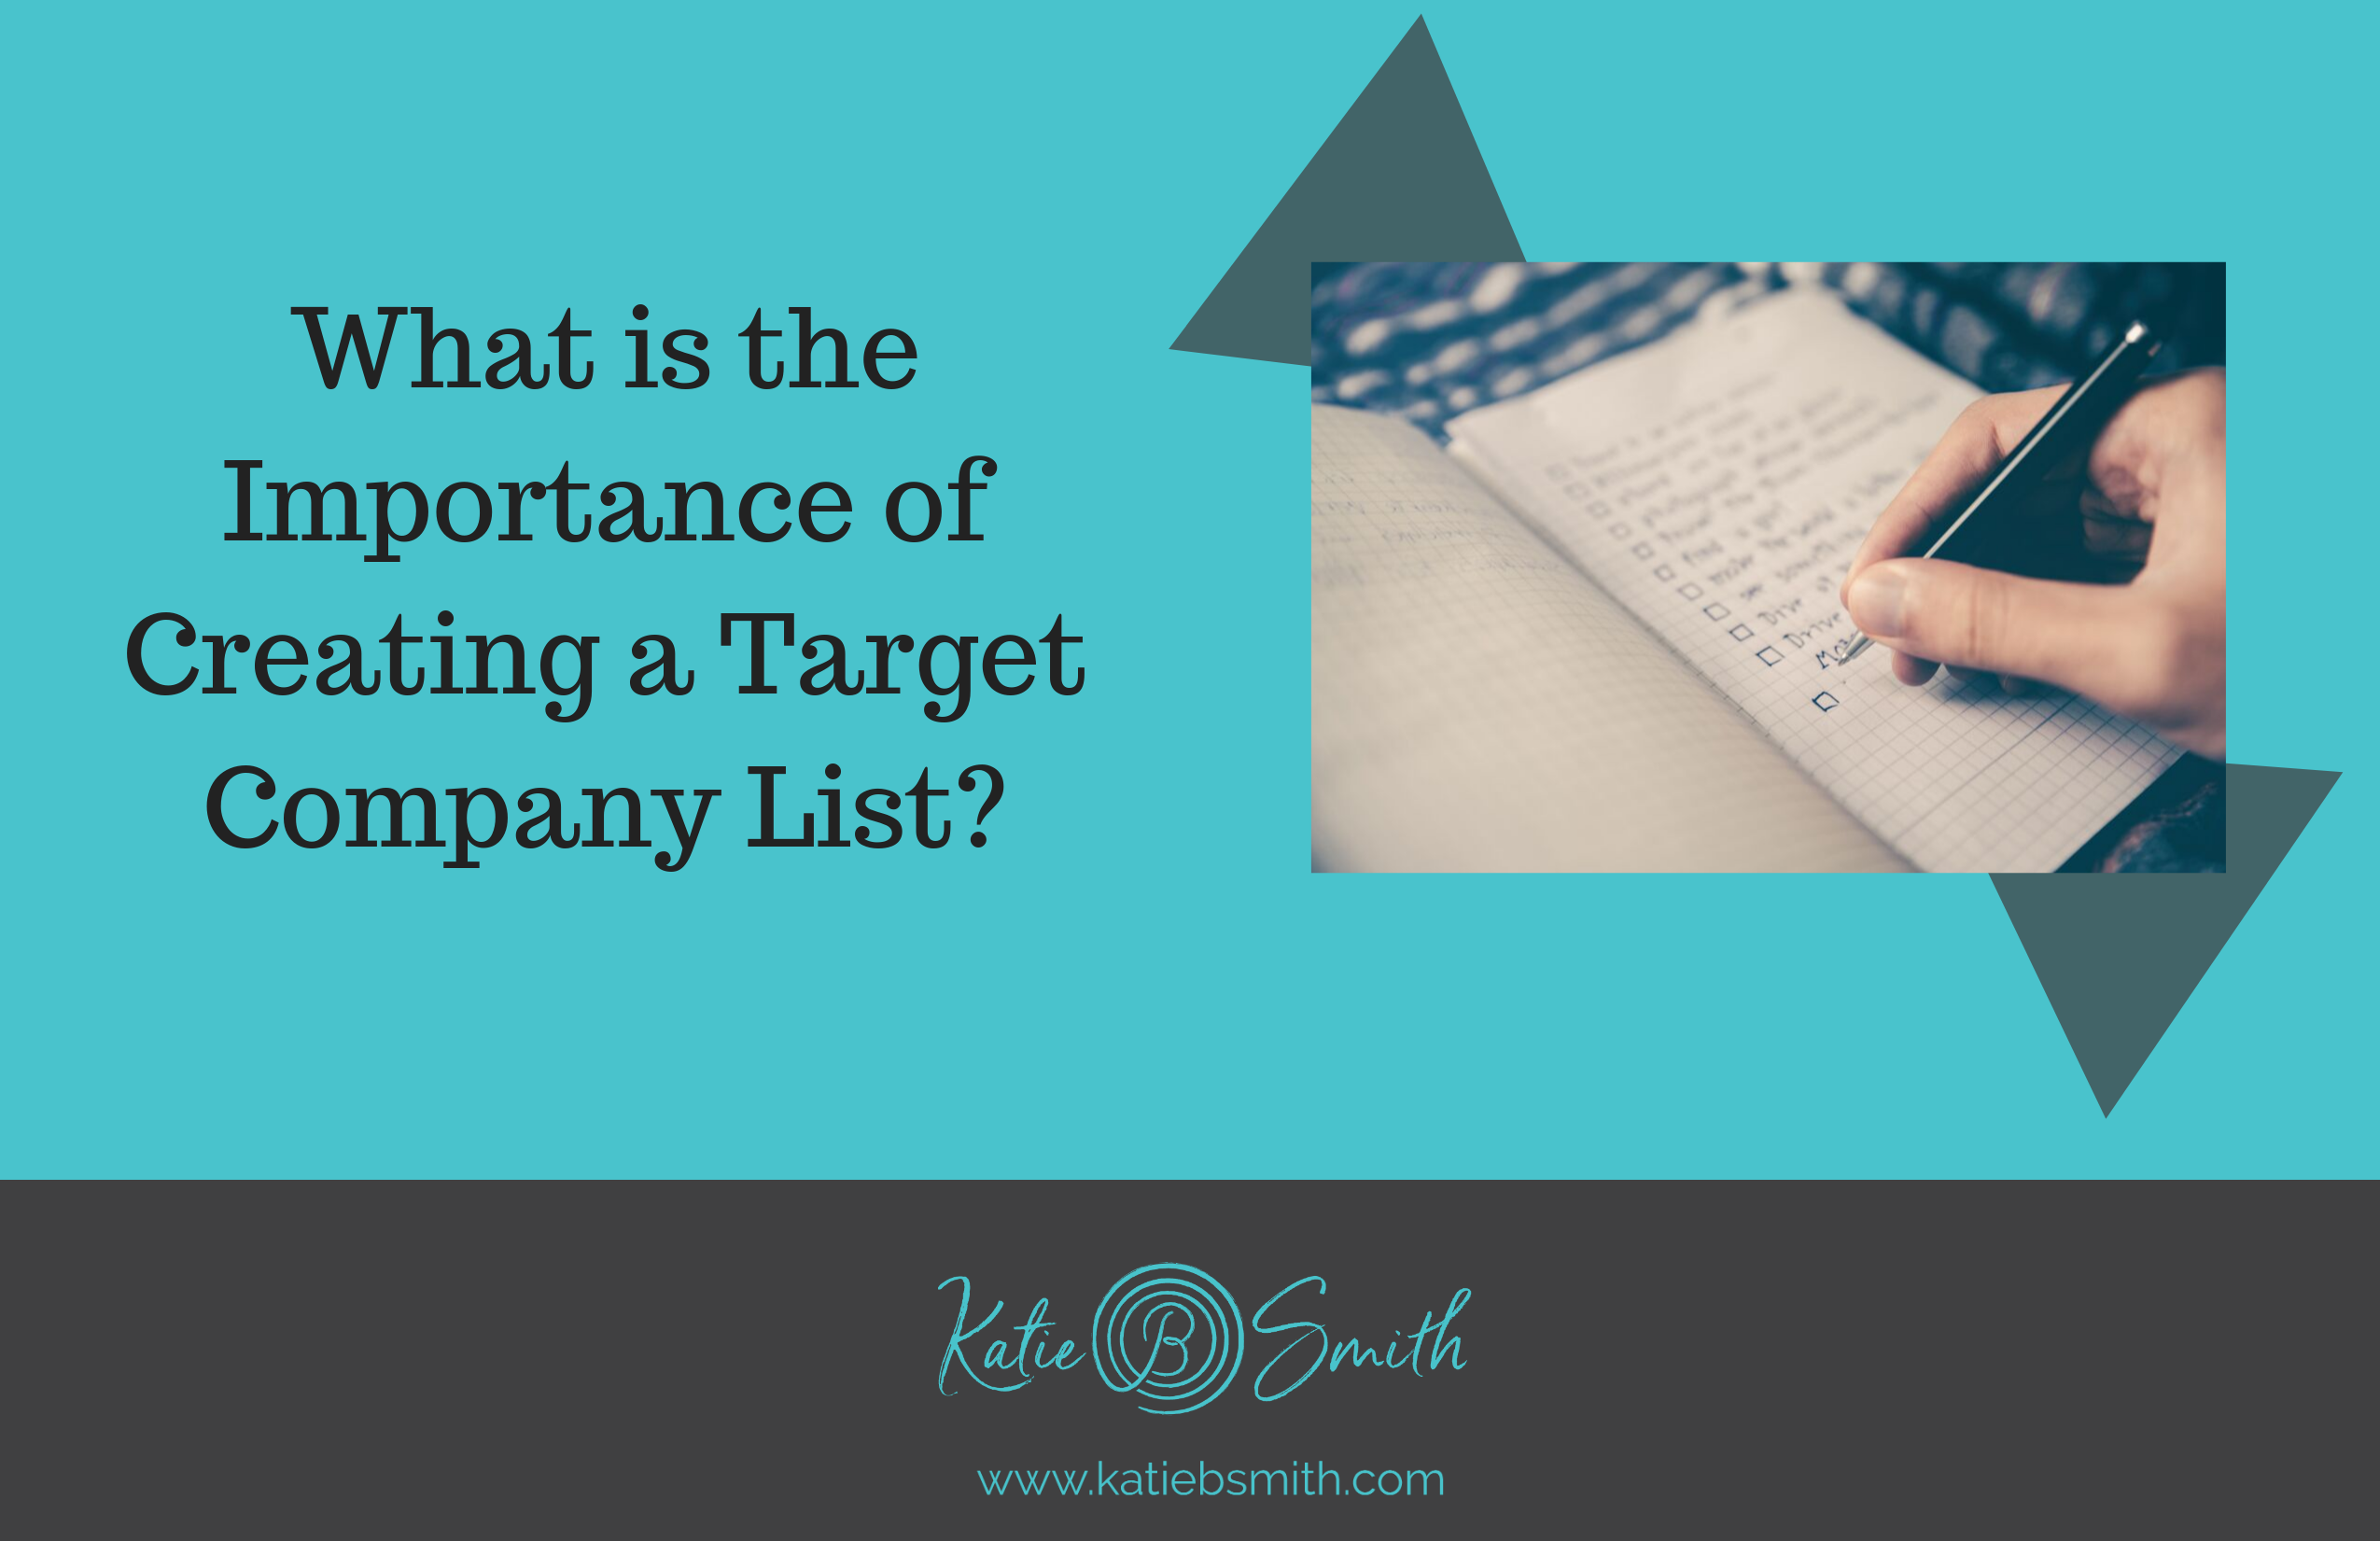 What is the Importance of Creating a Target Company List?